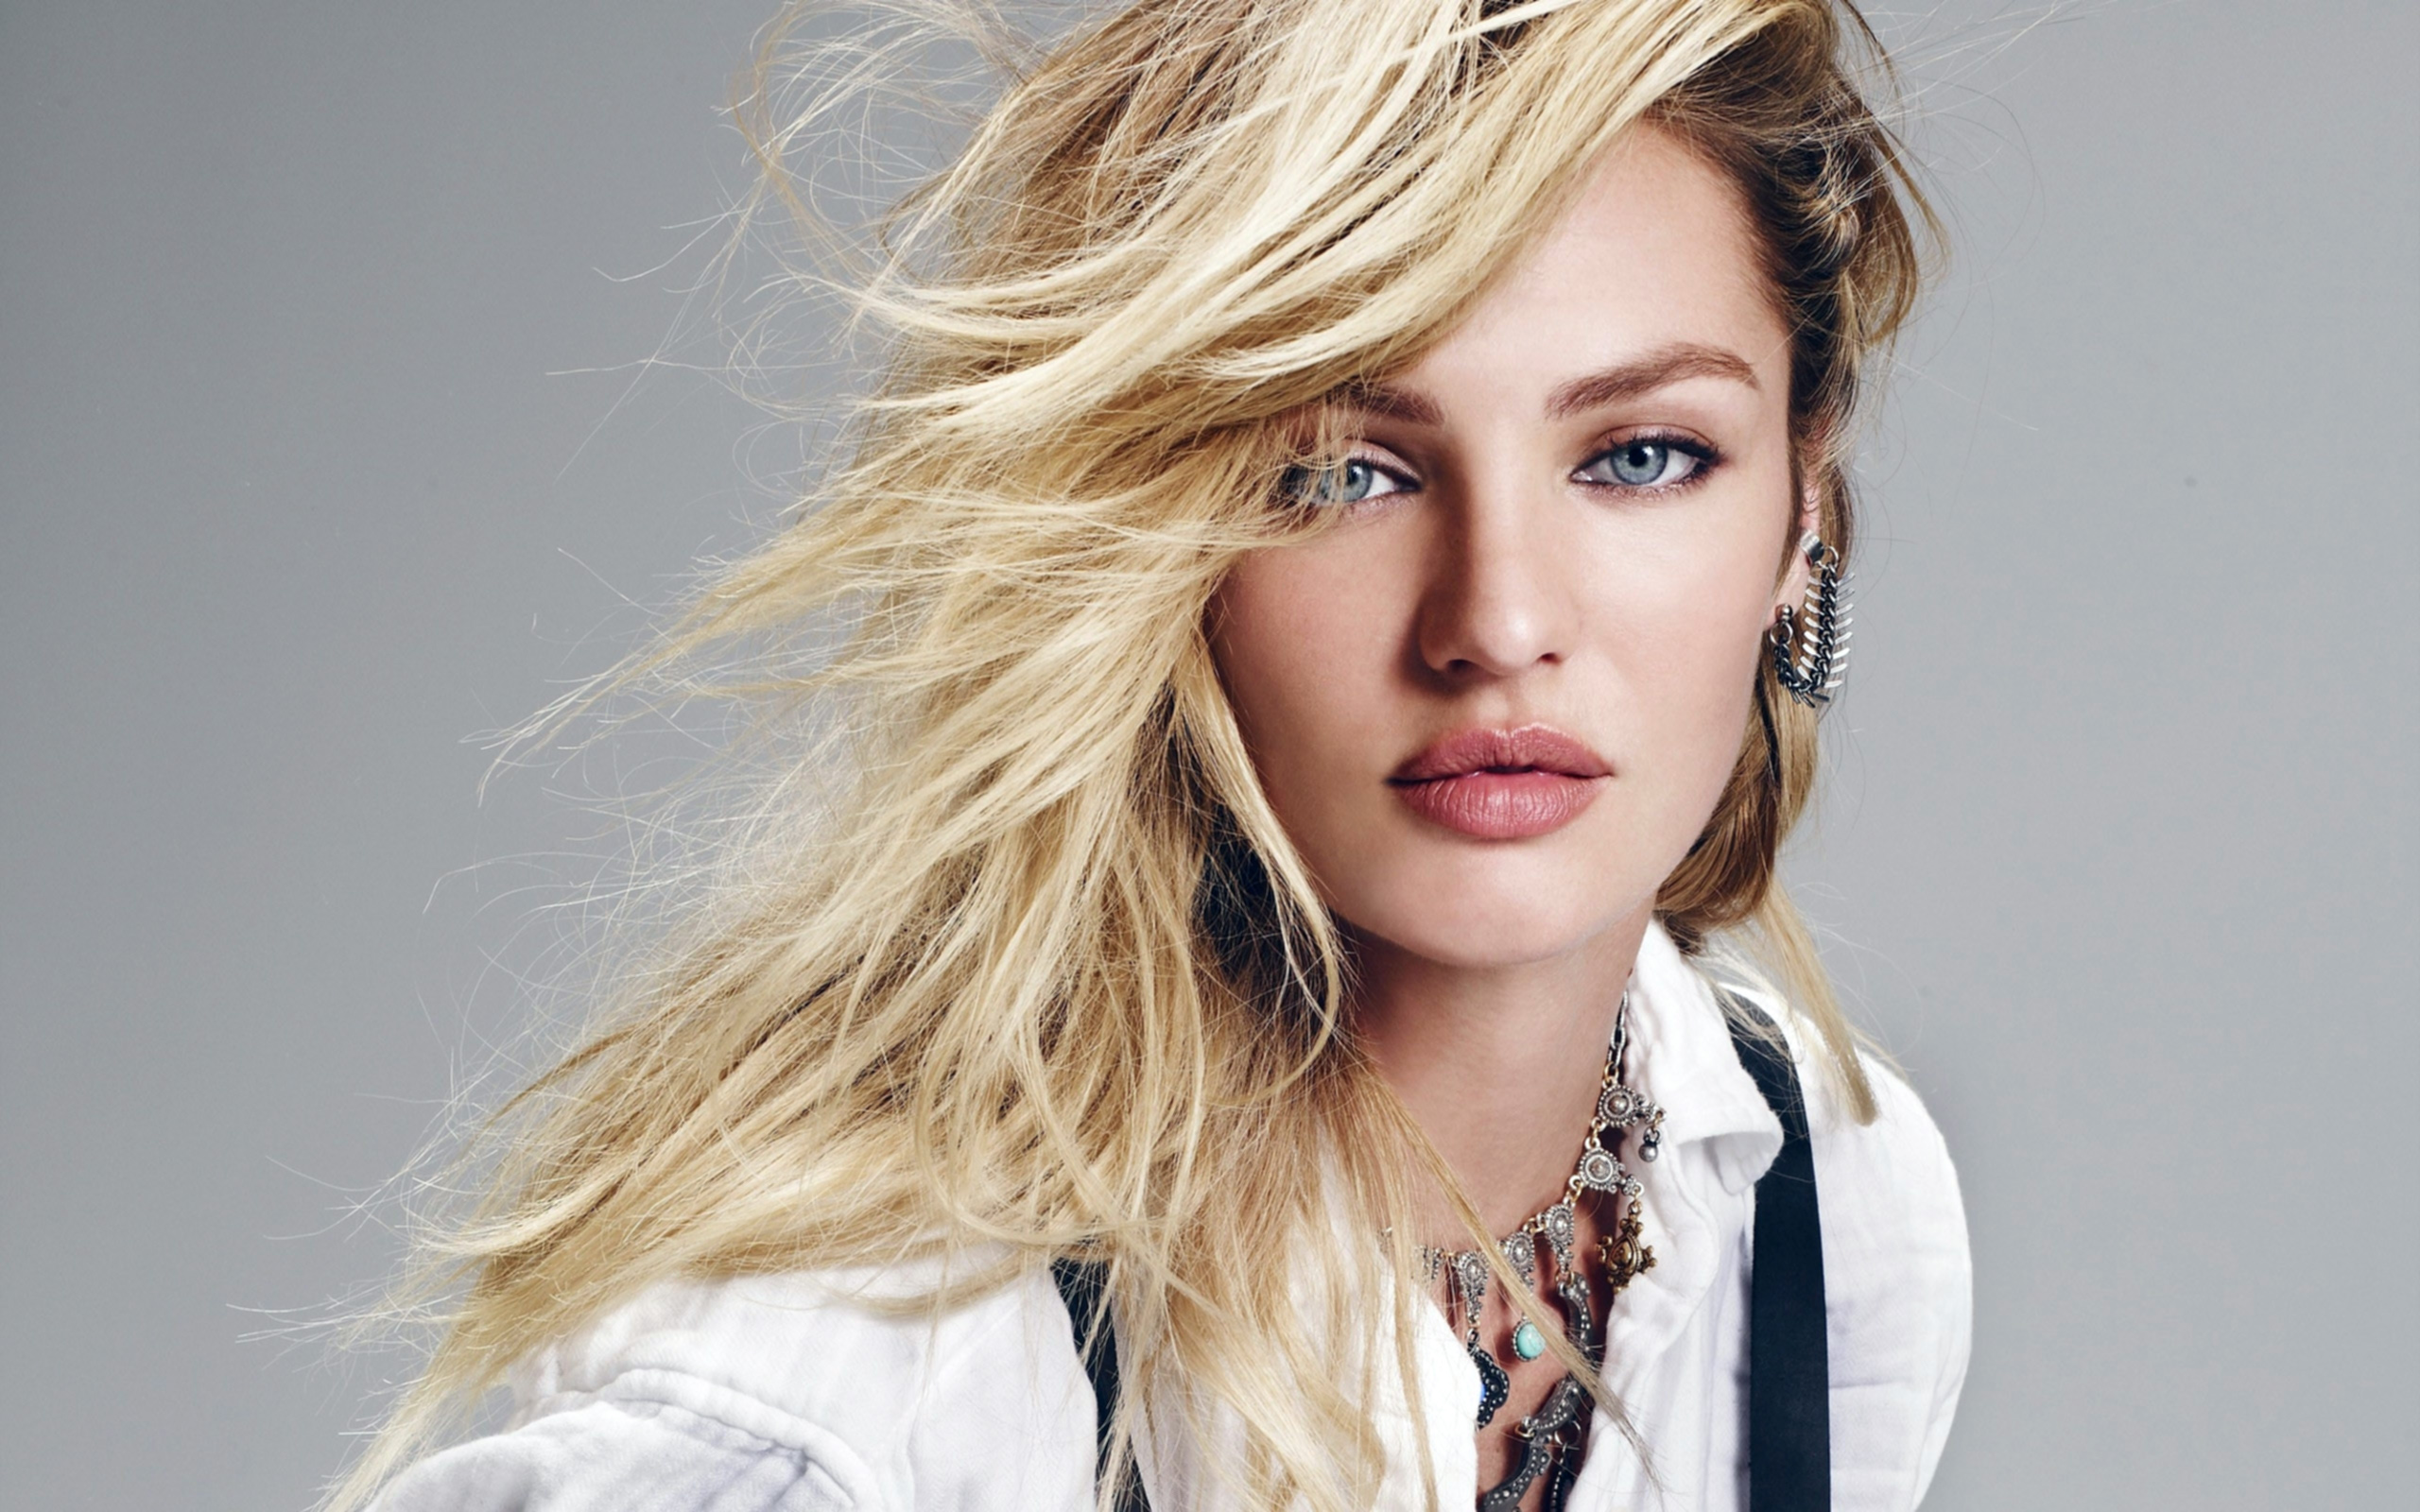 Model Candice Swanepoel Wallpapers HD Wallpapers